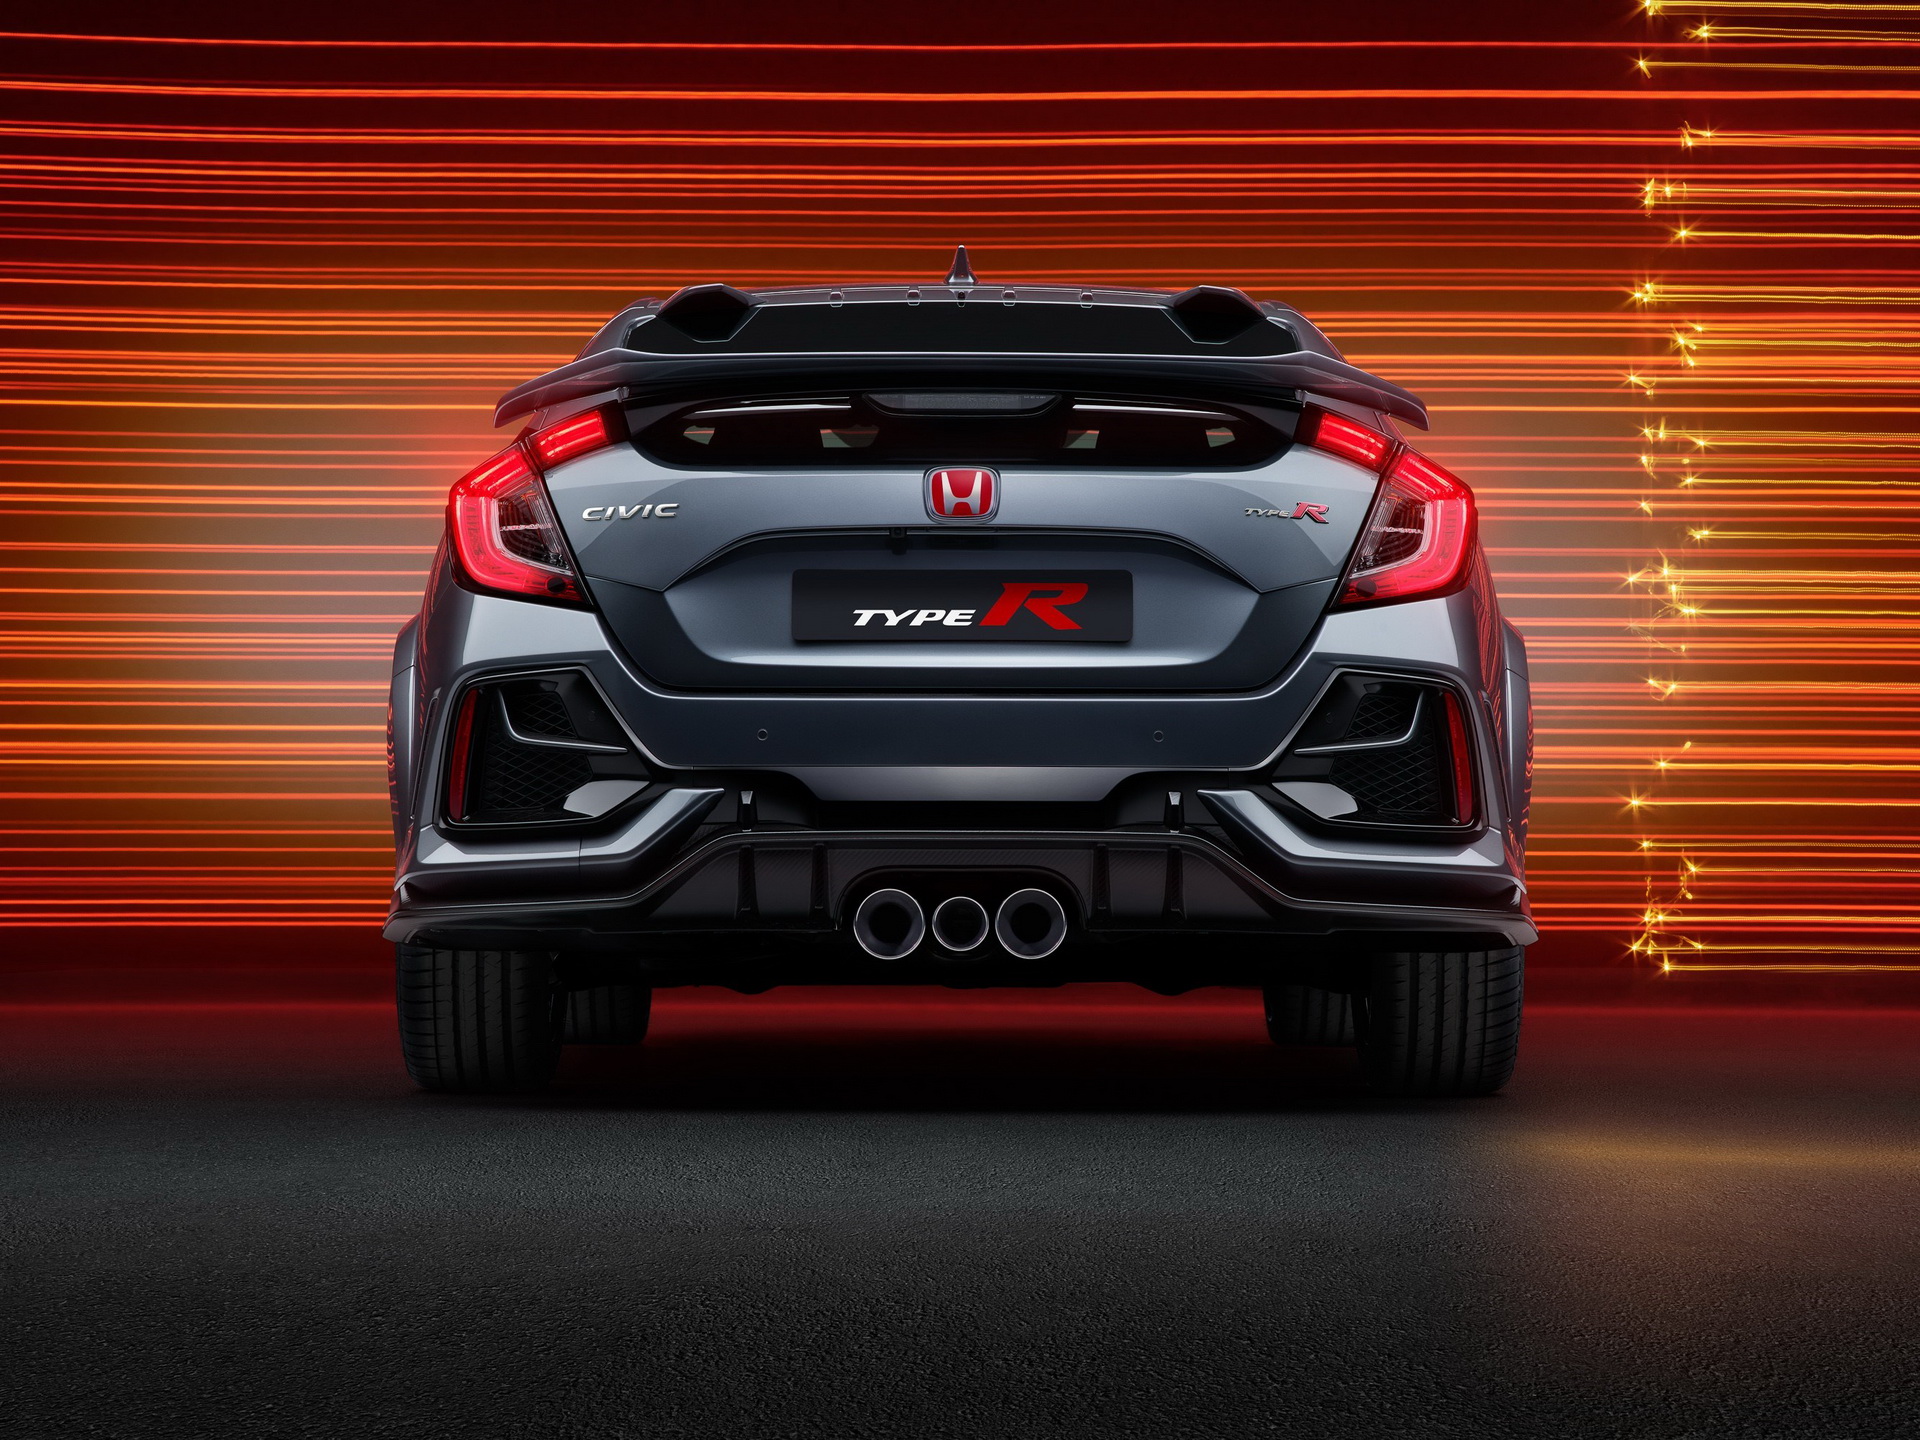 Honda Civic Type R looks even more badass in touring car form - CNET